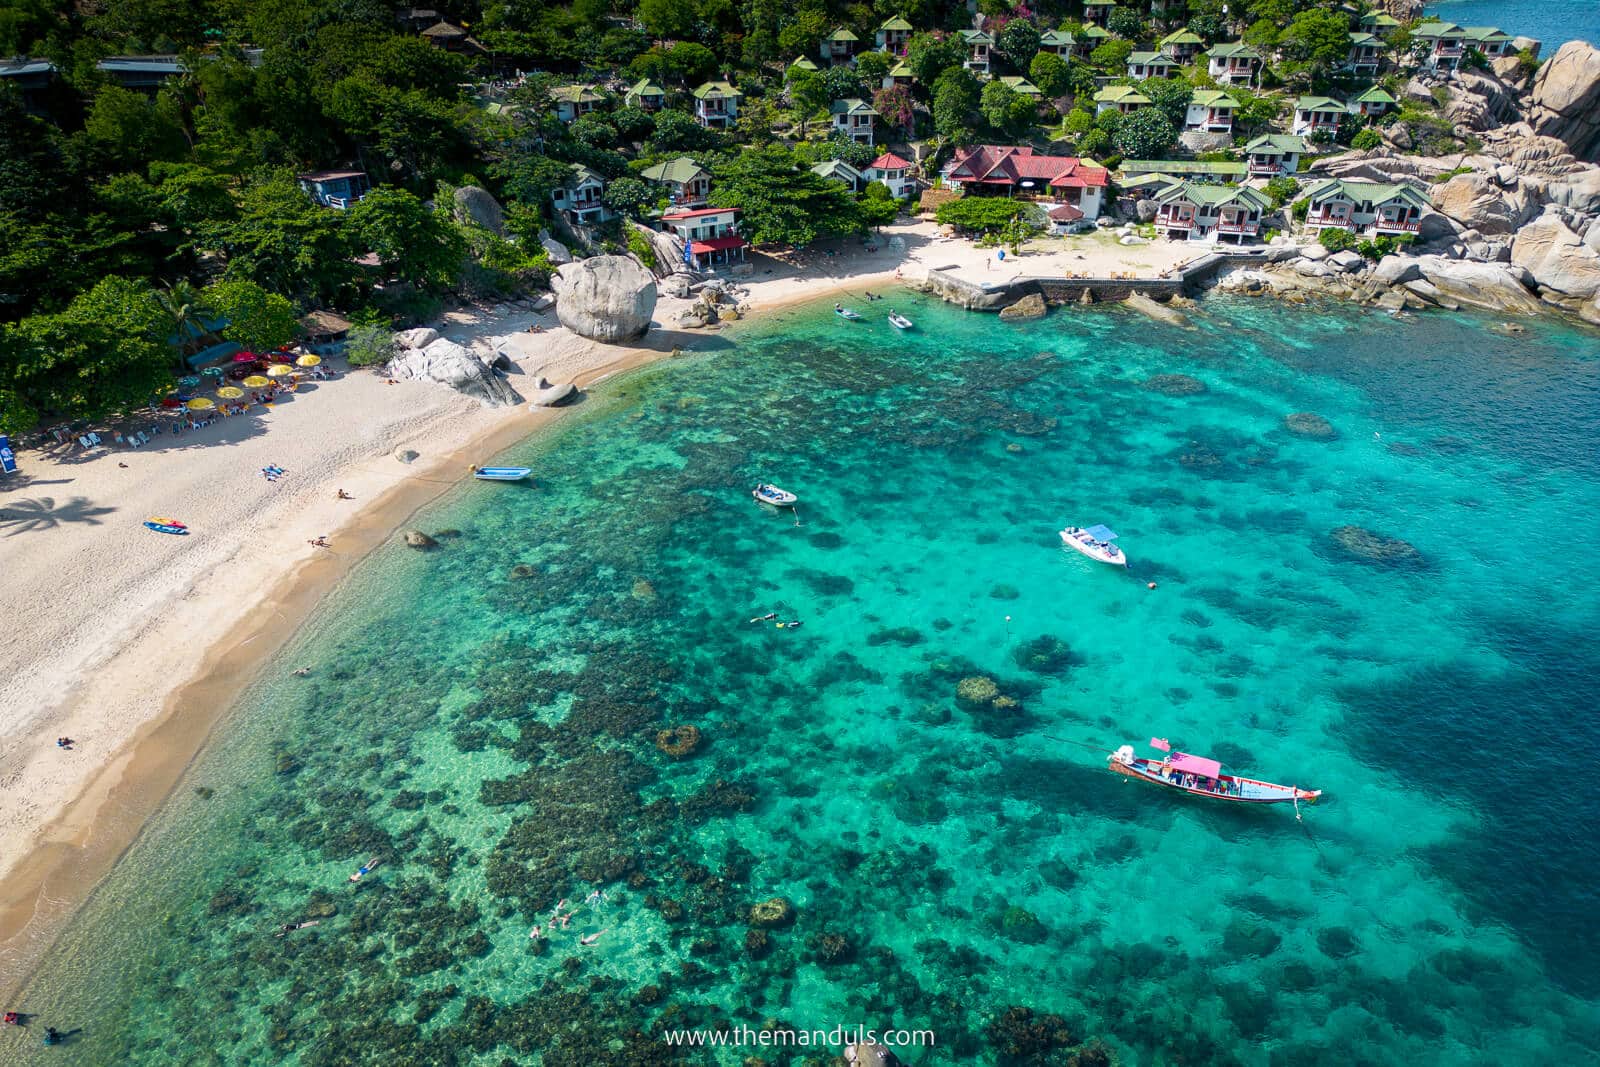 Tanote Bay Koh Tao, Snorkeling koh tao best things to do on Koh Tao, BEst places Koh Tao, attractions, snorkeling Koh Tao, Koh Tao Best Beaches, Koh Tao Itinerary